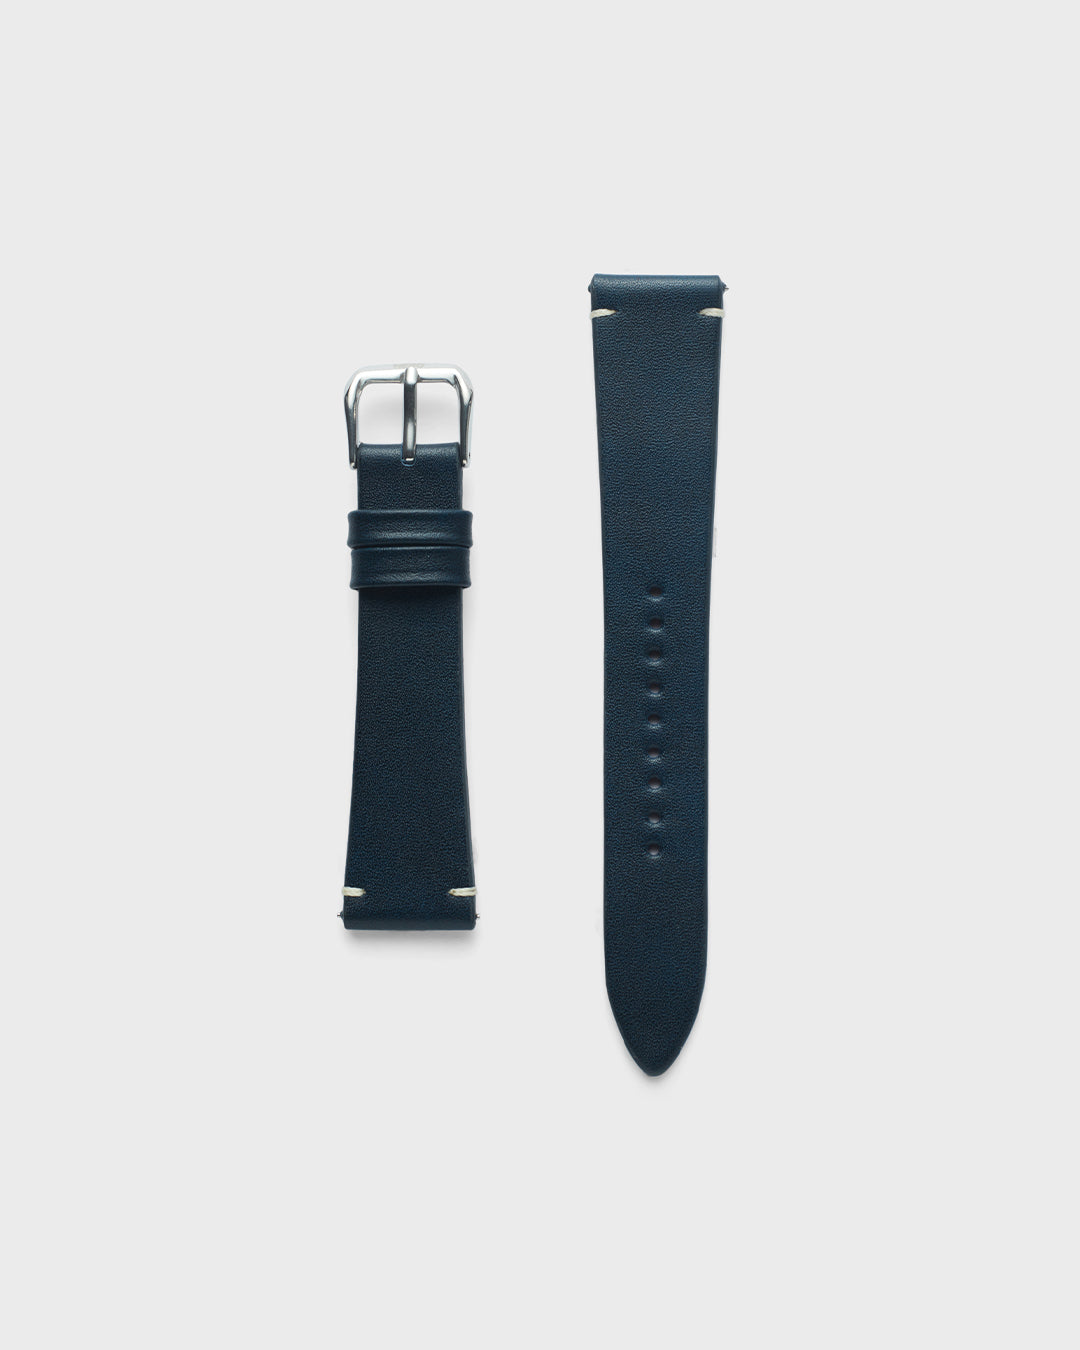 INTRO STRAP - FOR QUARTZ, MECHANICAL & SMART WATCHES [Duo Stitch in Fine Indian Leather] My Store